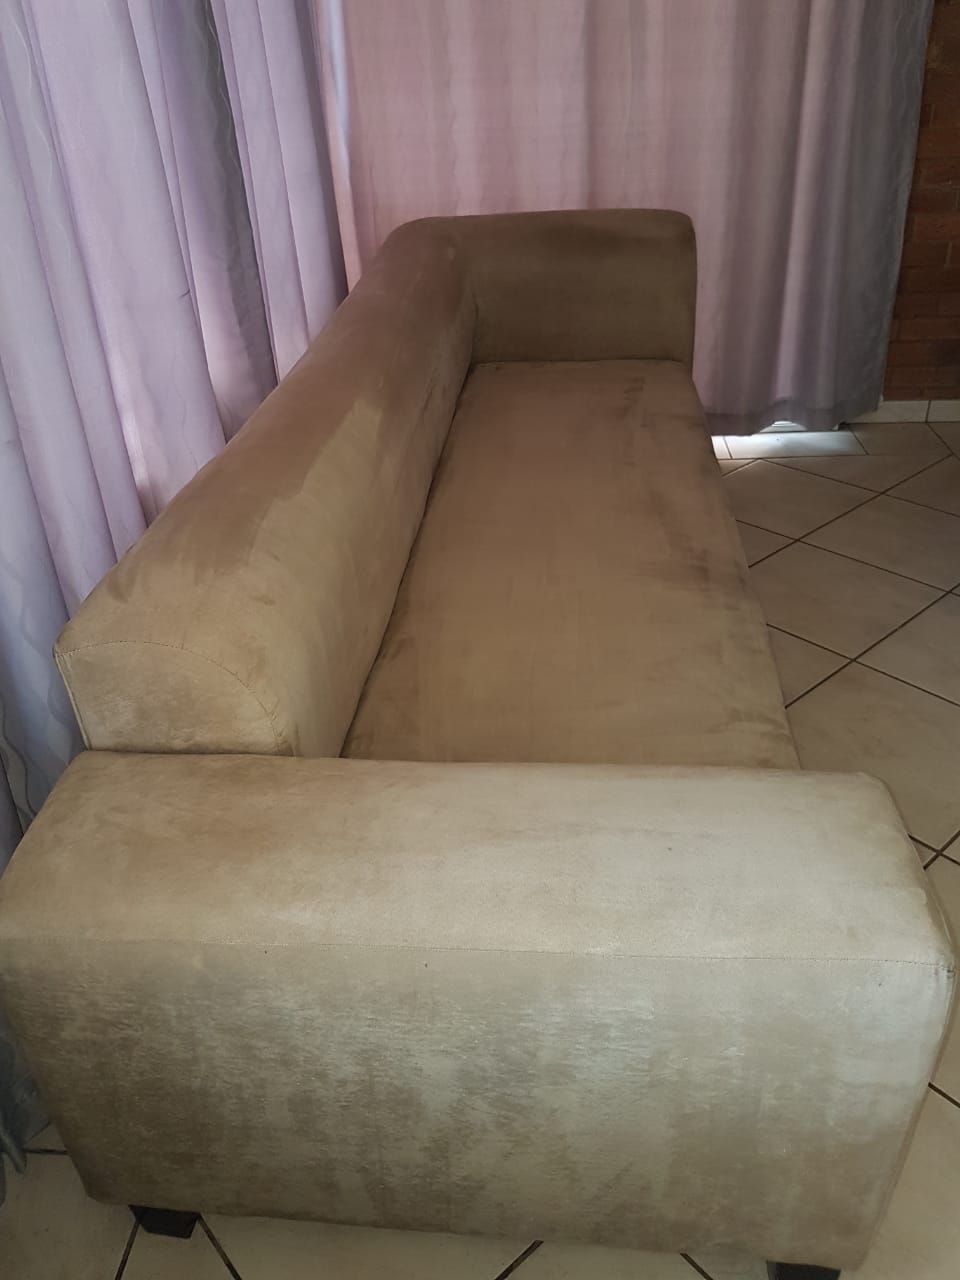 Four seater velour cream coloured couch